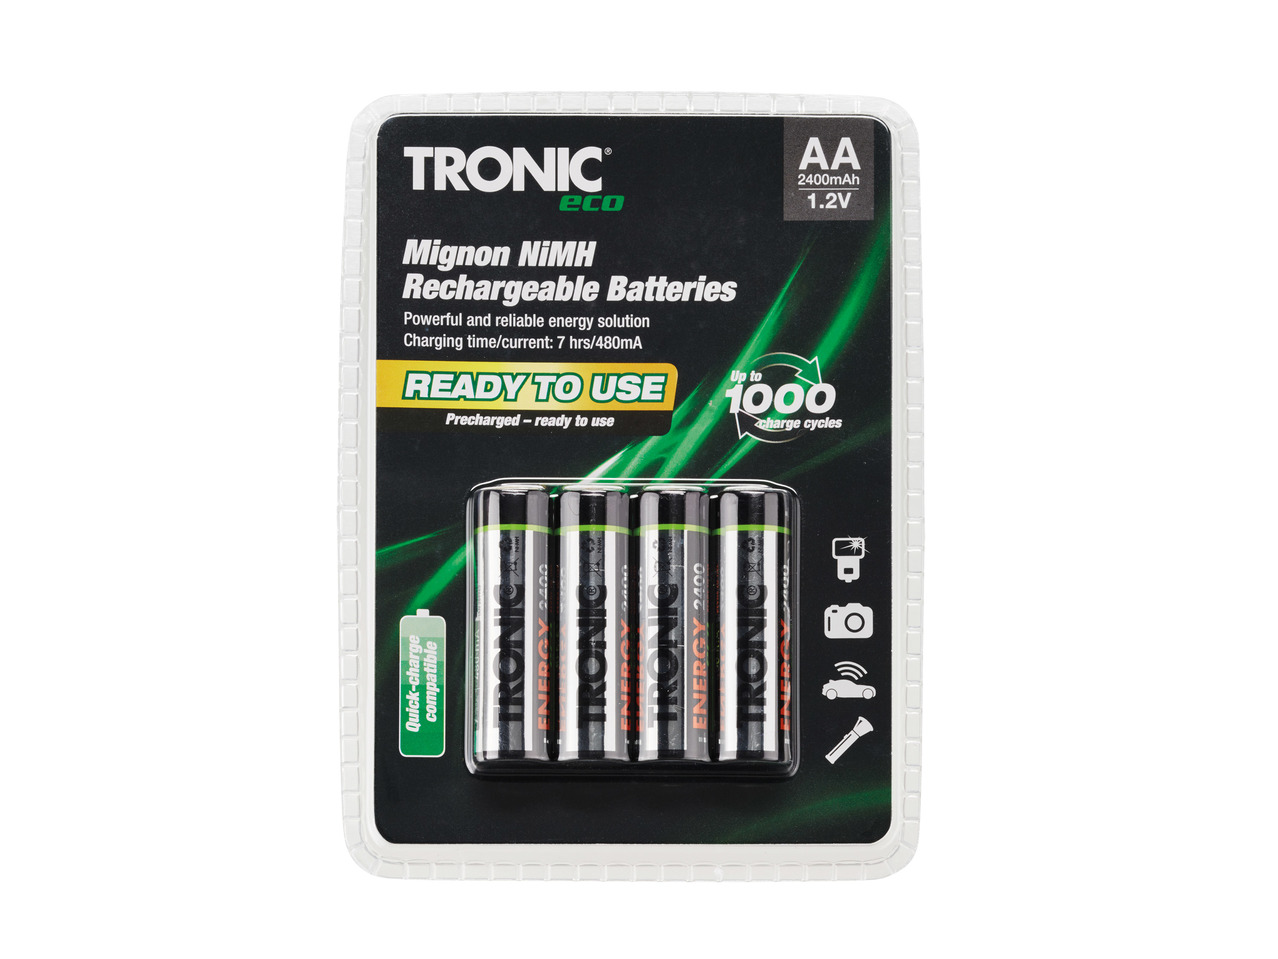 Tronic Rechargeable Battery Assortment1